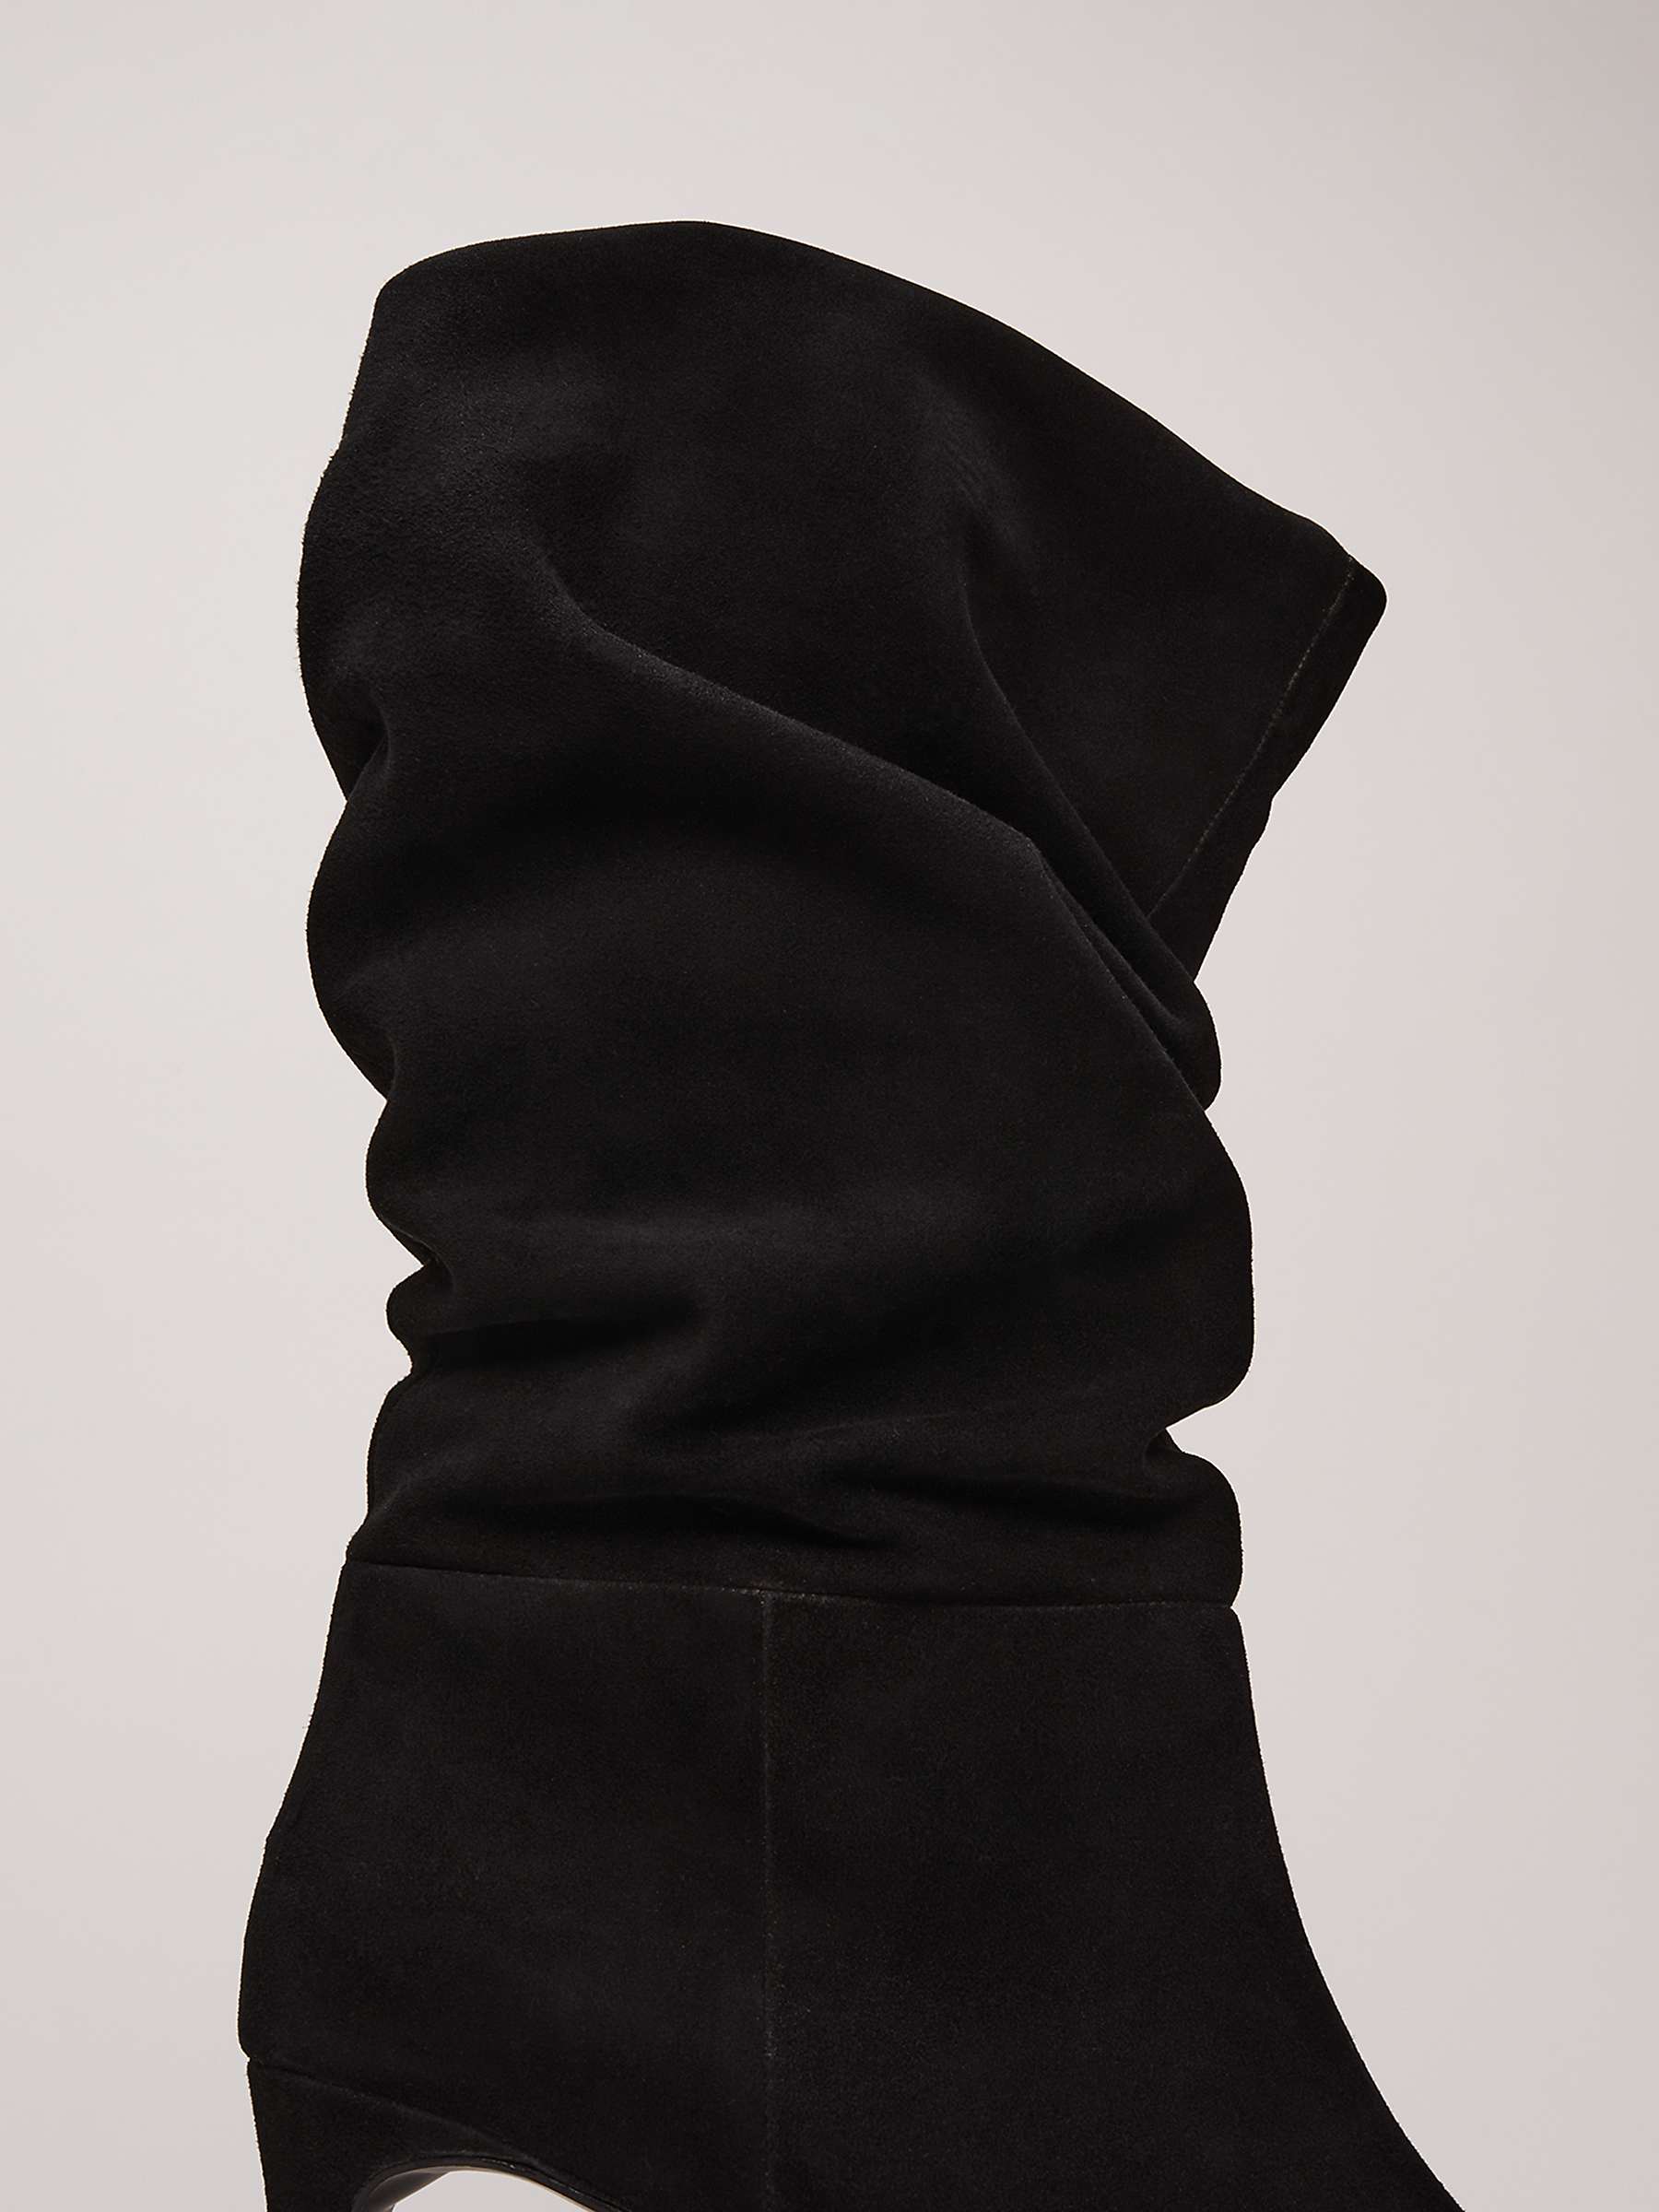 Buy Phase Eight Suede Ruched Boots, Black Online at johnlewis.com